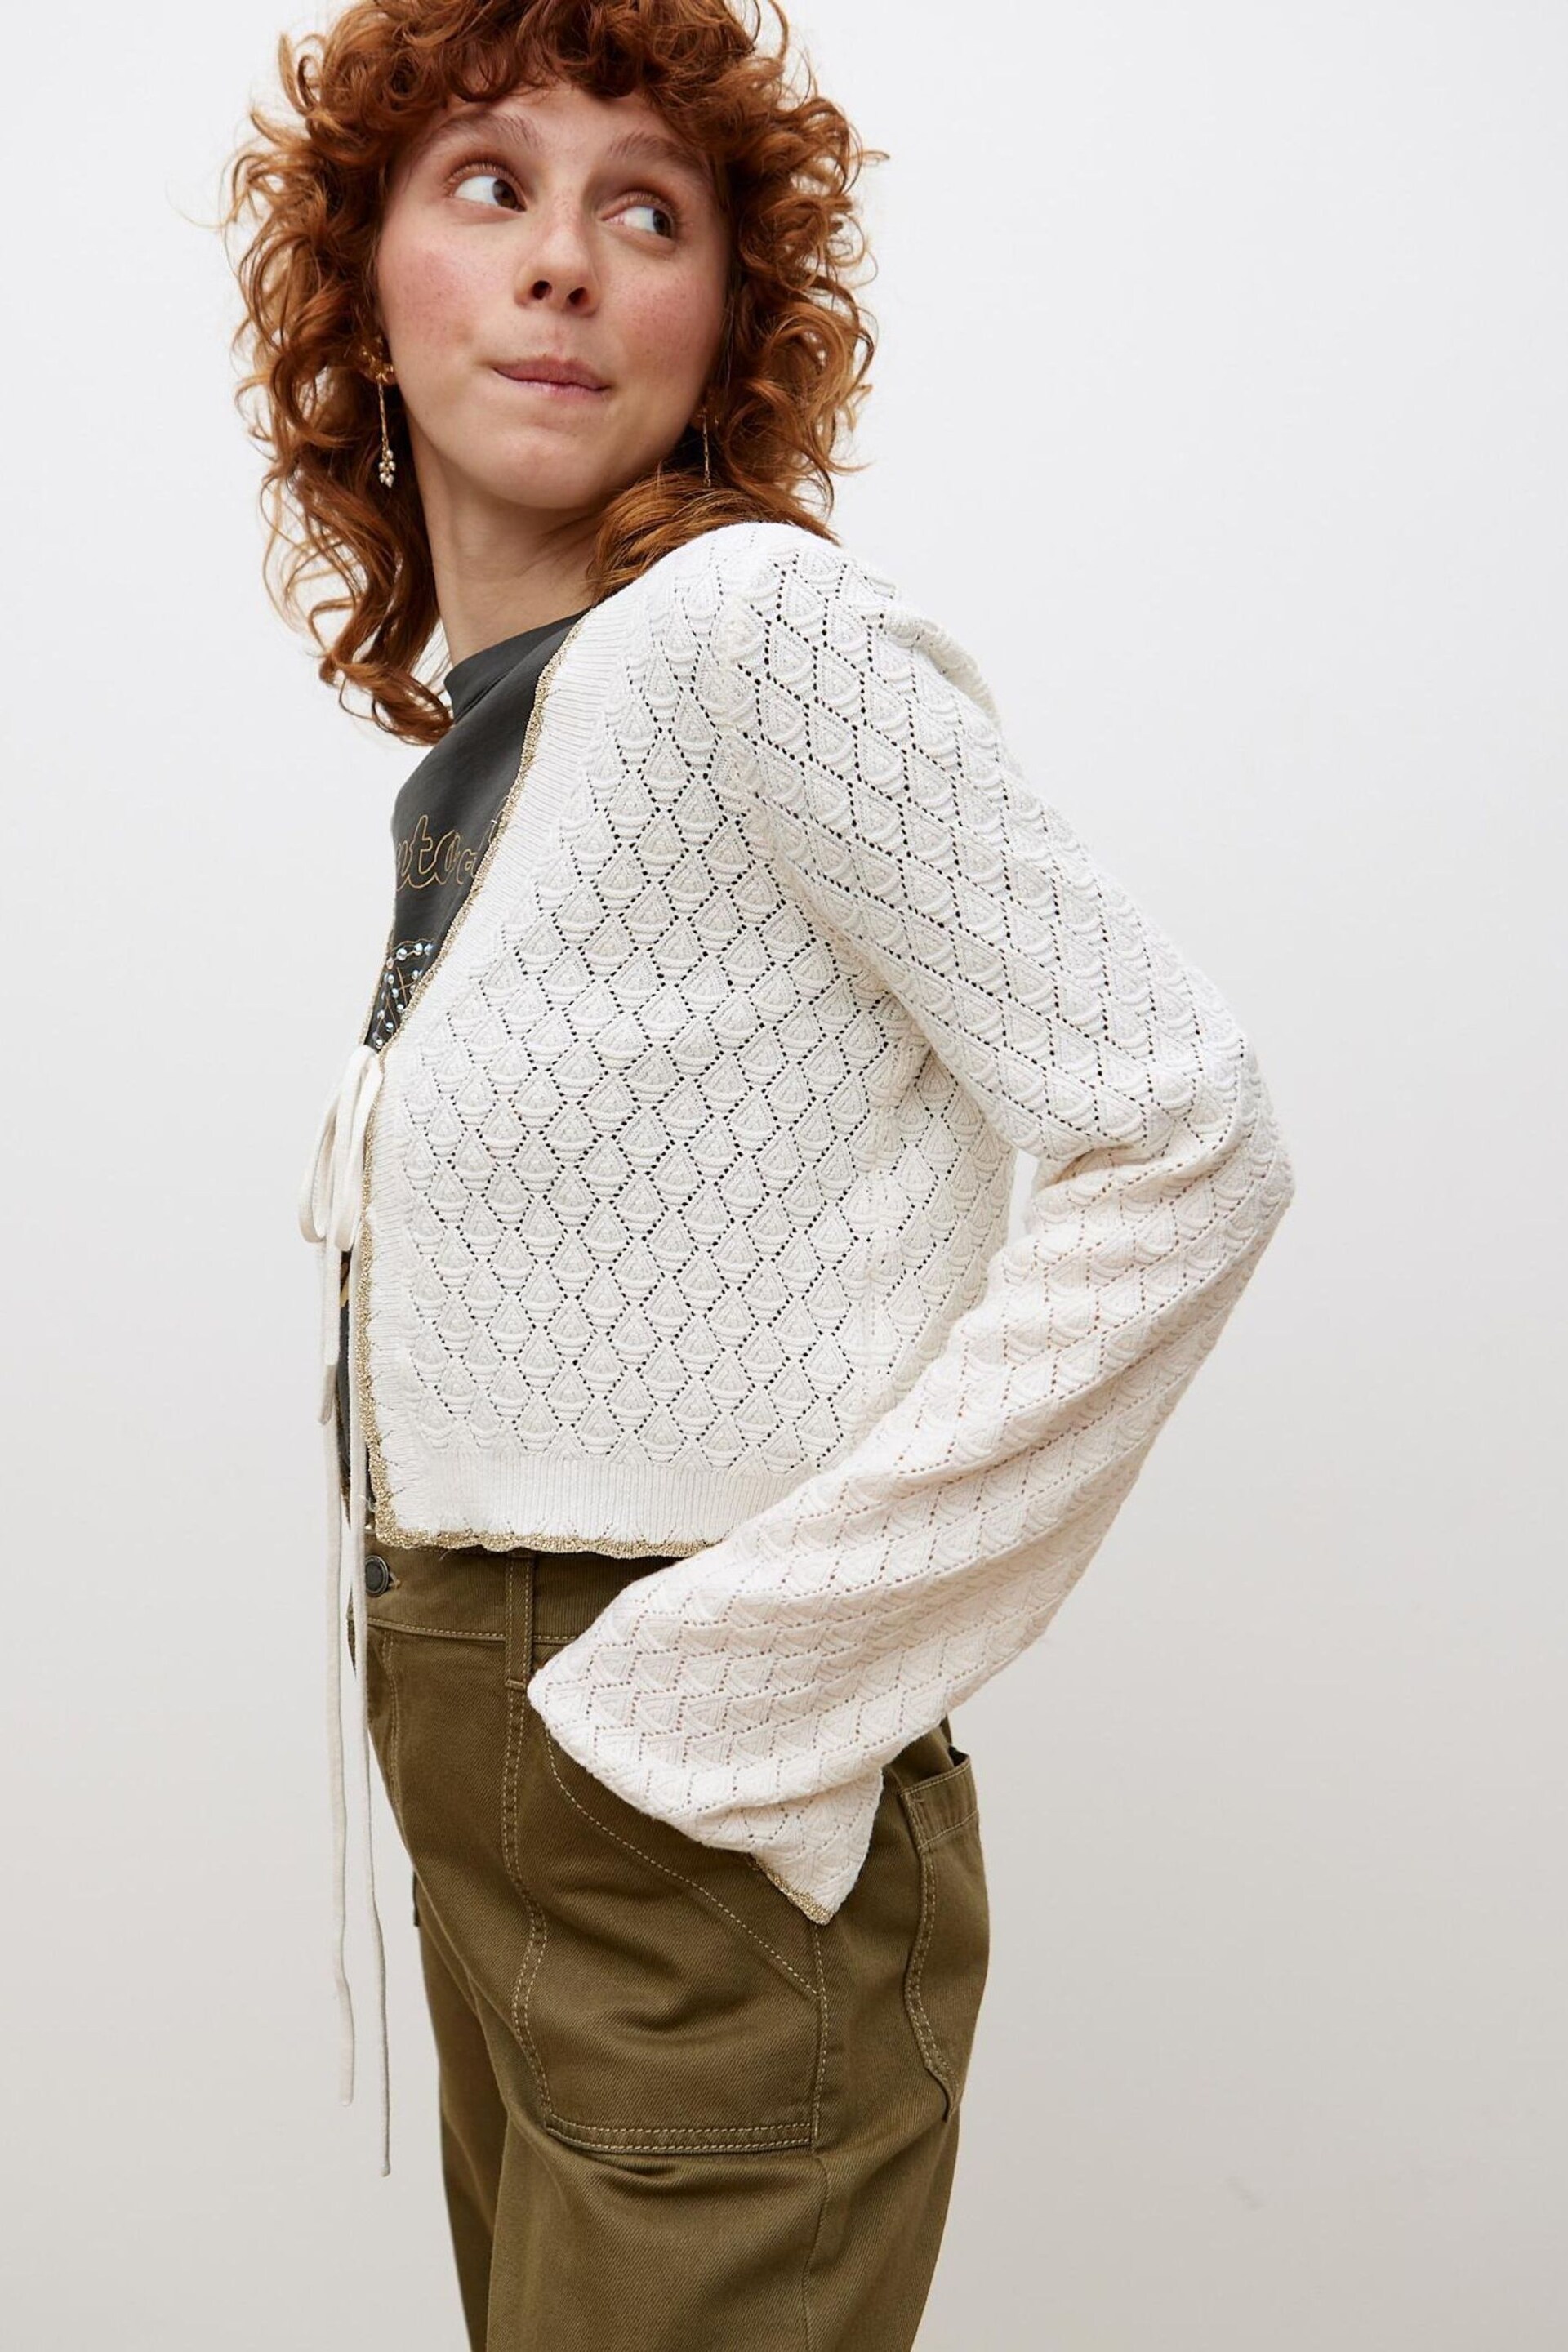 Oliver Bonas White Sparkle Knitted Tie Cardigan - Image 3 of 9